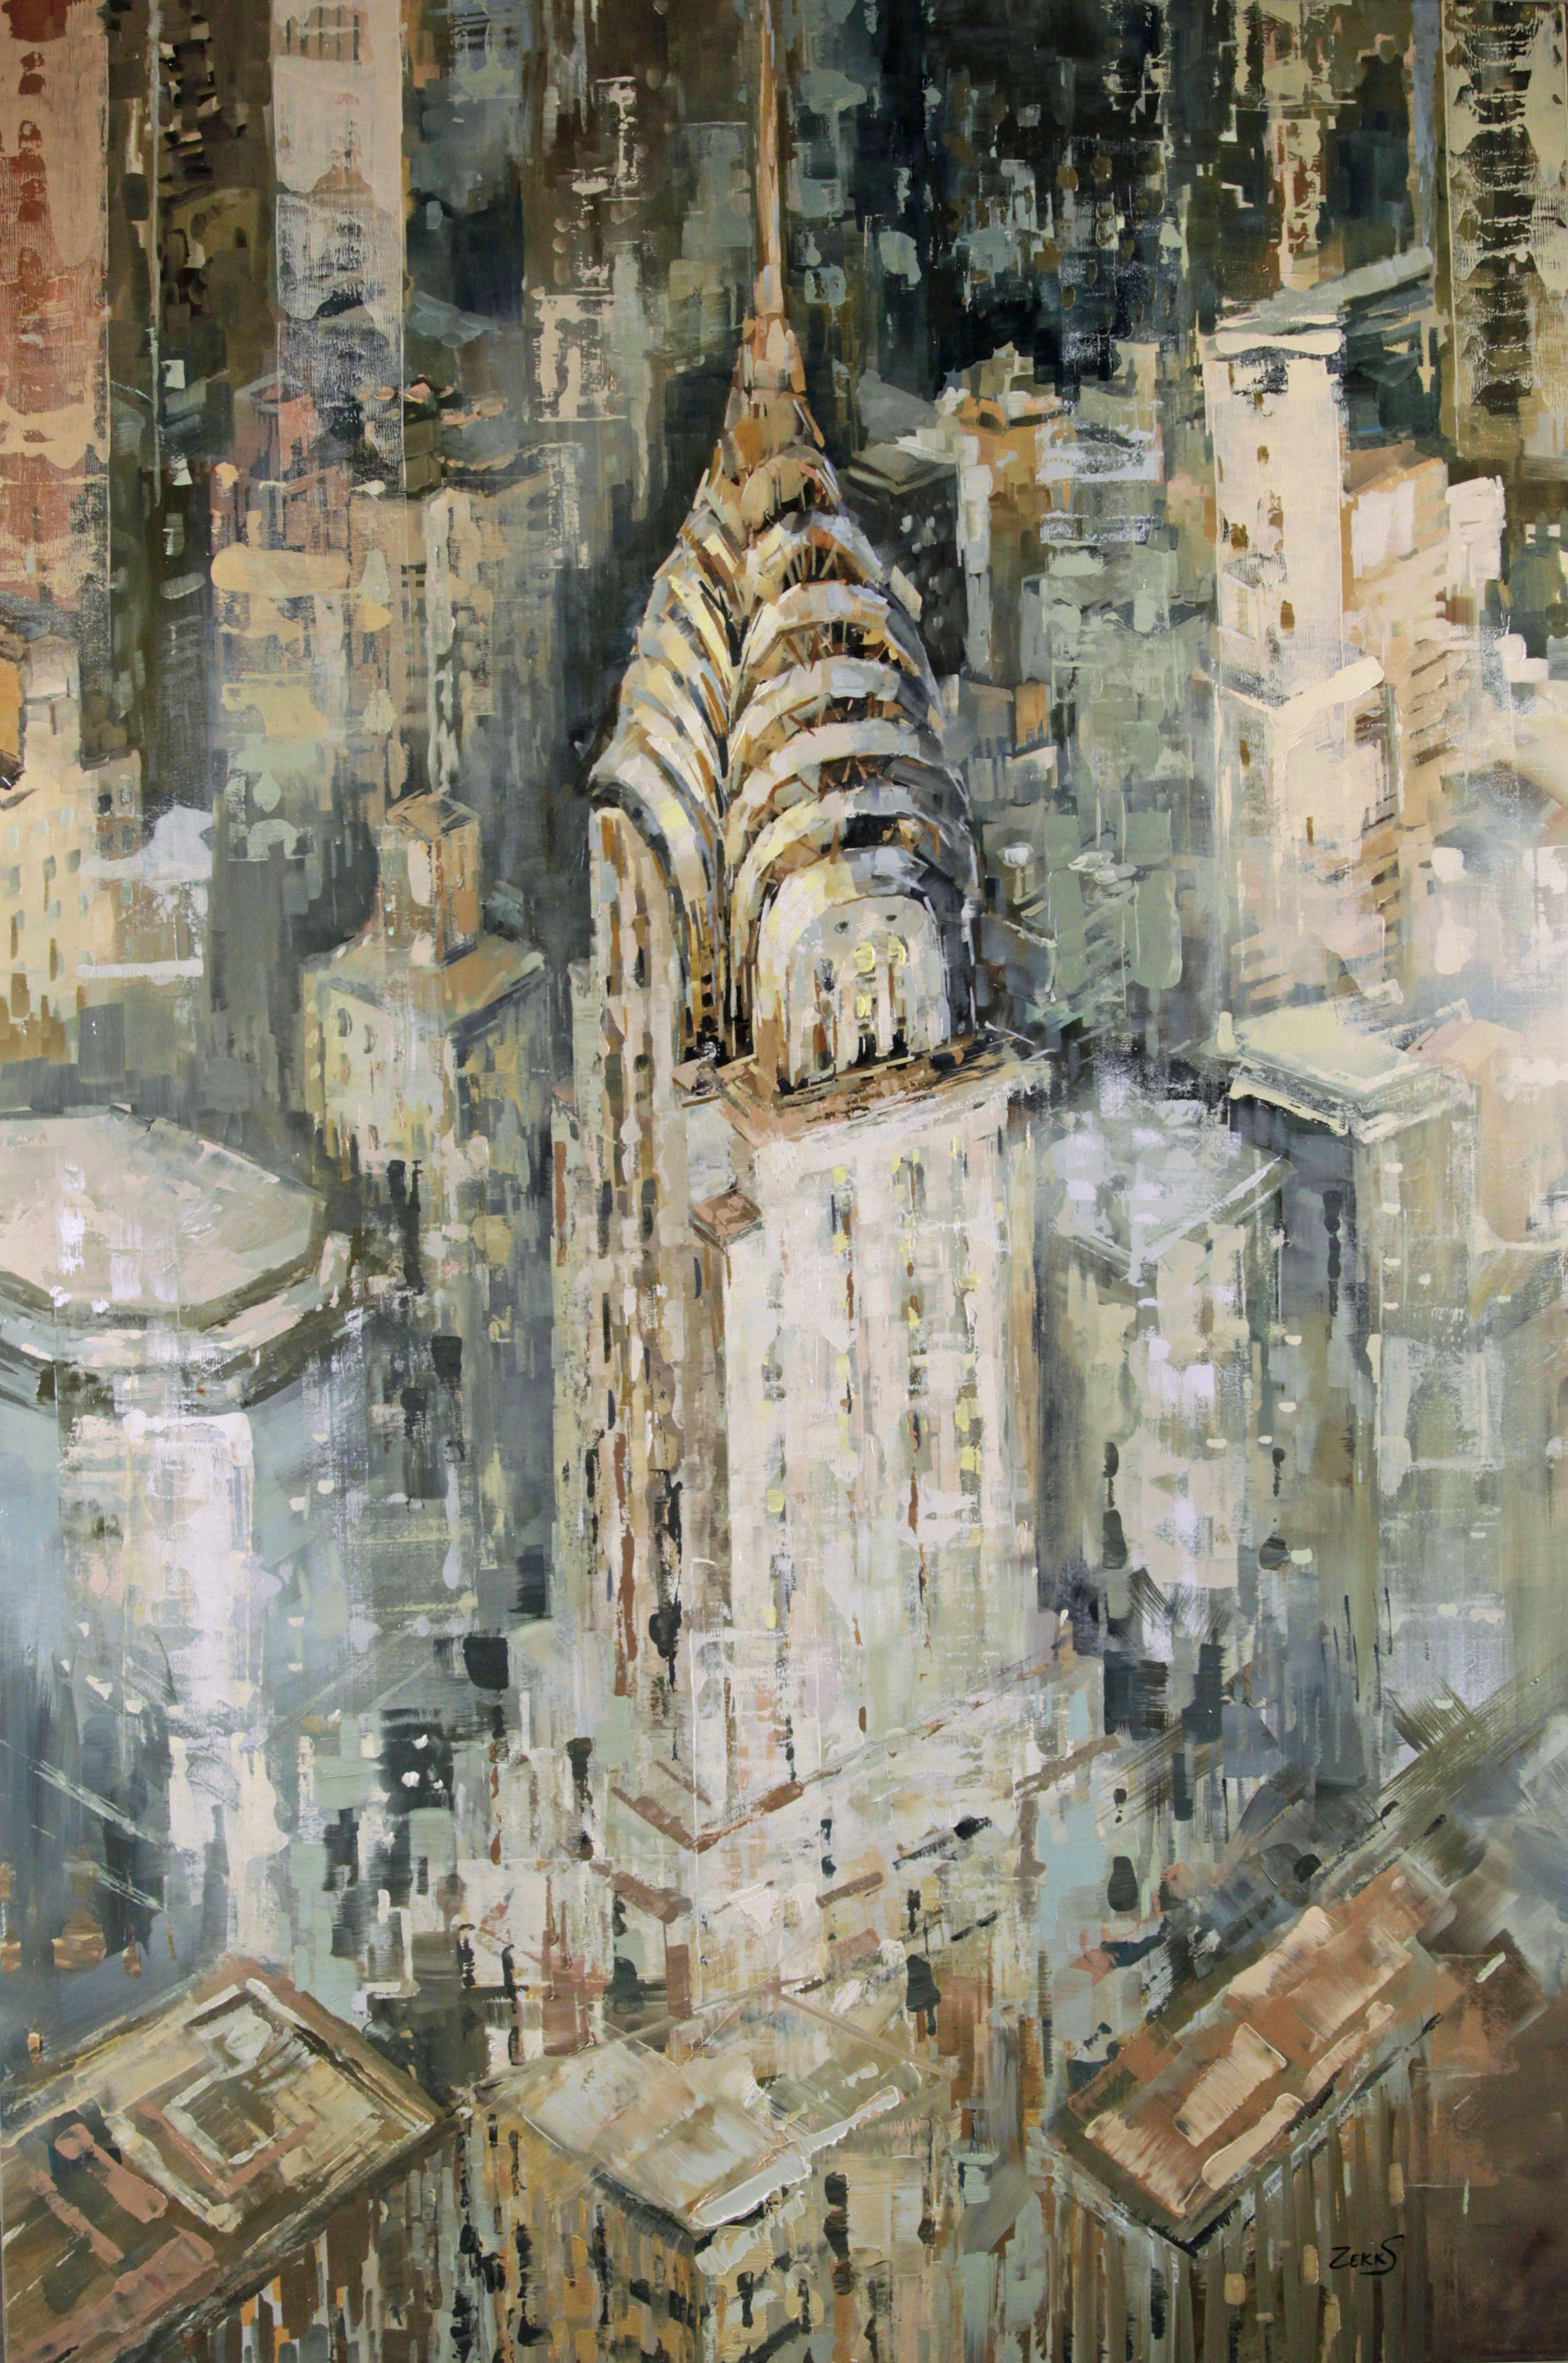 Size: 120 x 80 x 4,5 cm / 48" x 32" x 1.7" inches  Painted on a deep edge gallery wrapped canvas, painted edges as continuation of the piece.    Description:  "High Above"    New York provides not only a continuing excitation but also a spectacle